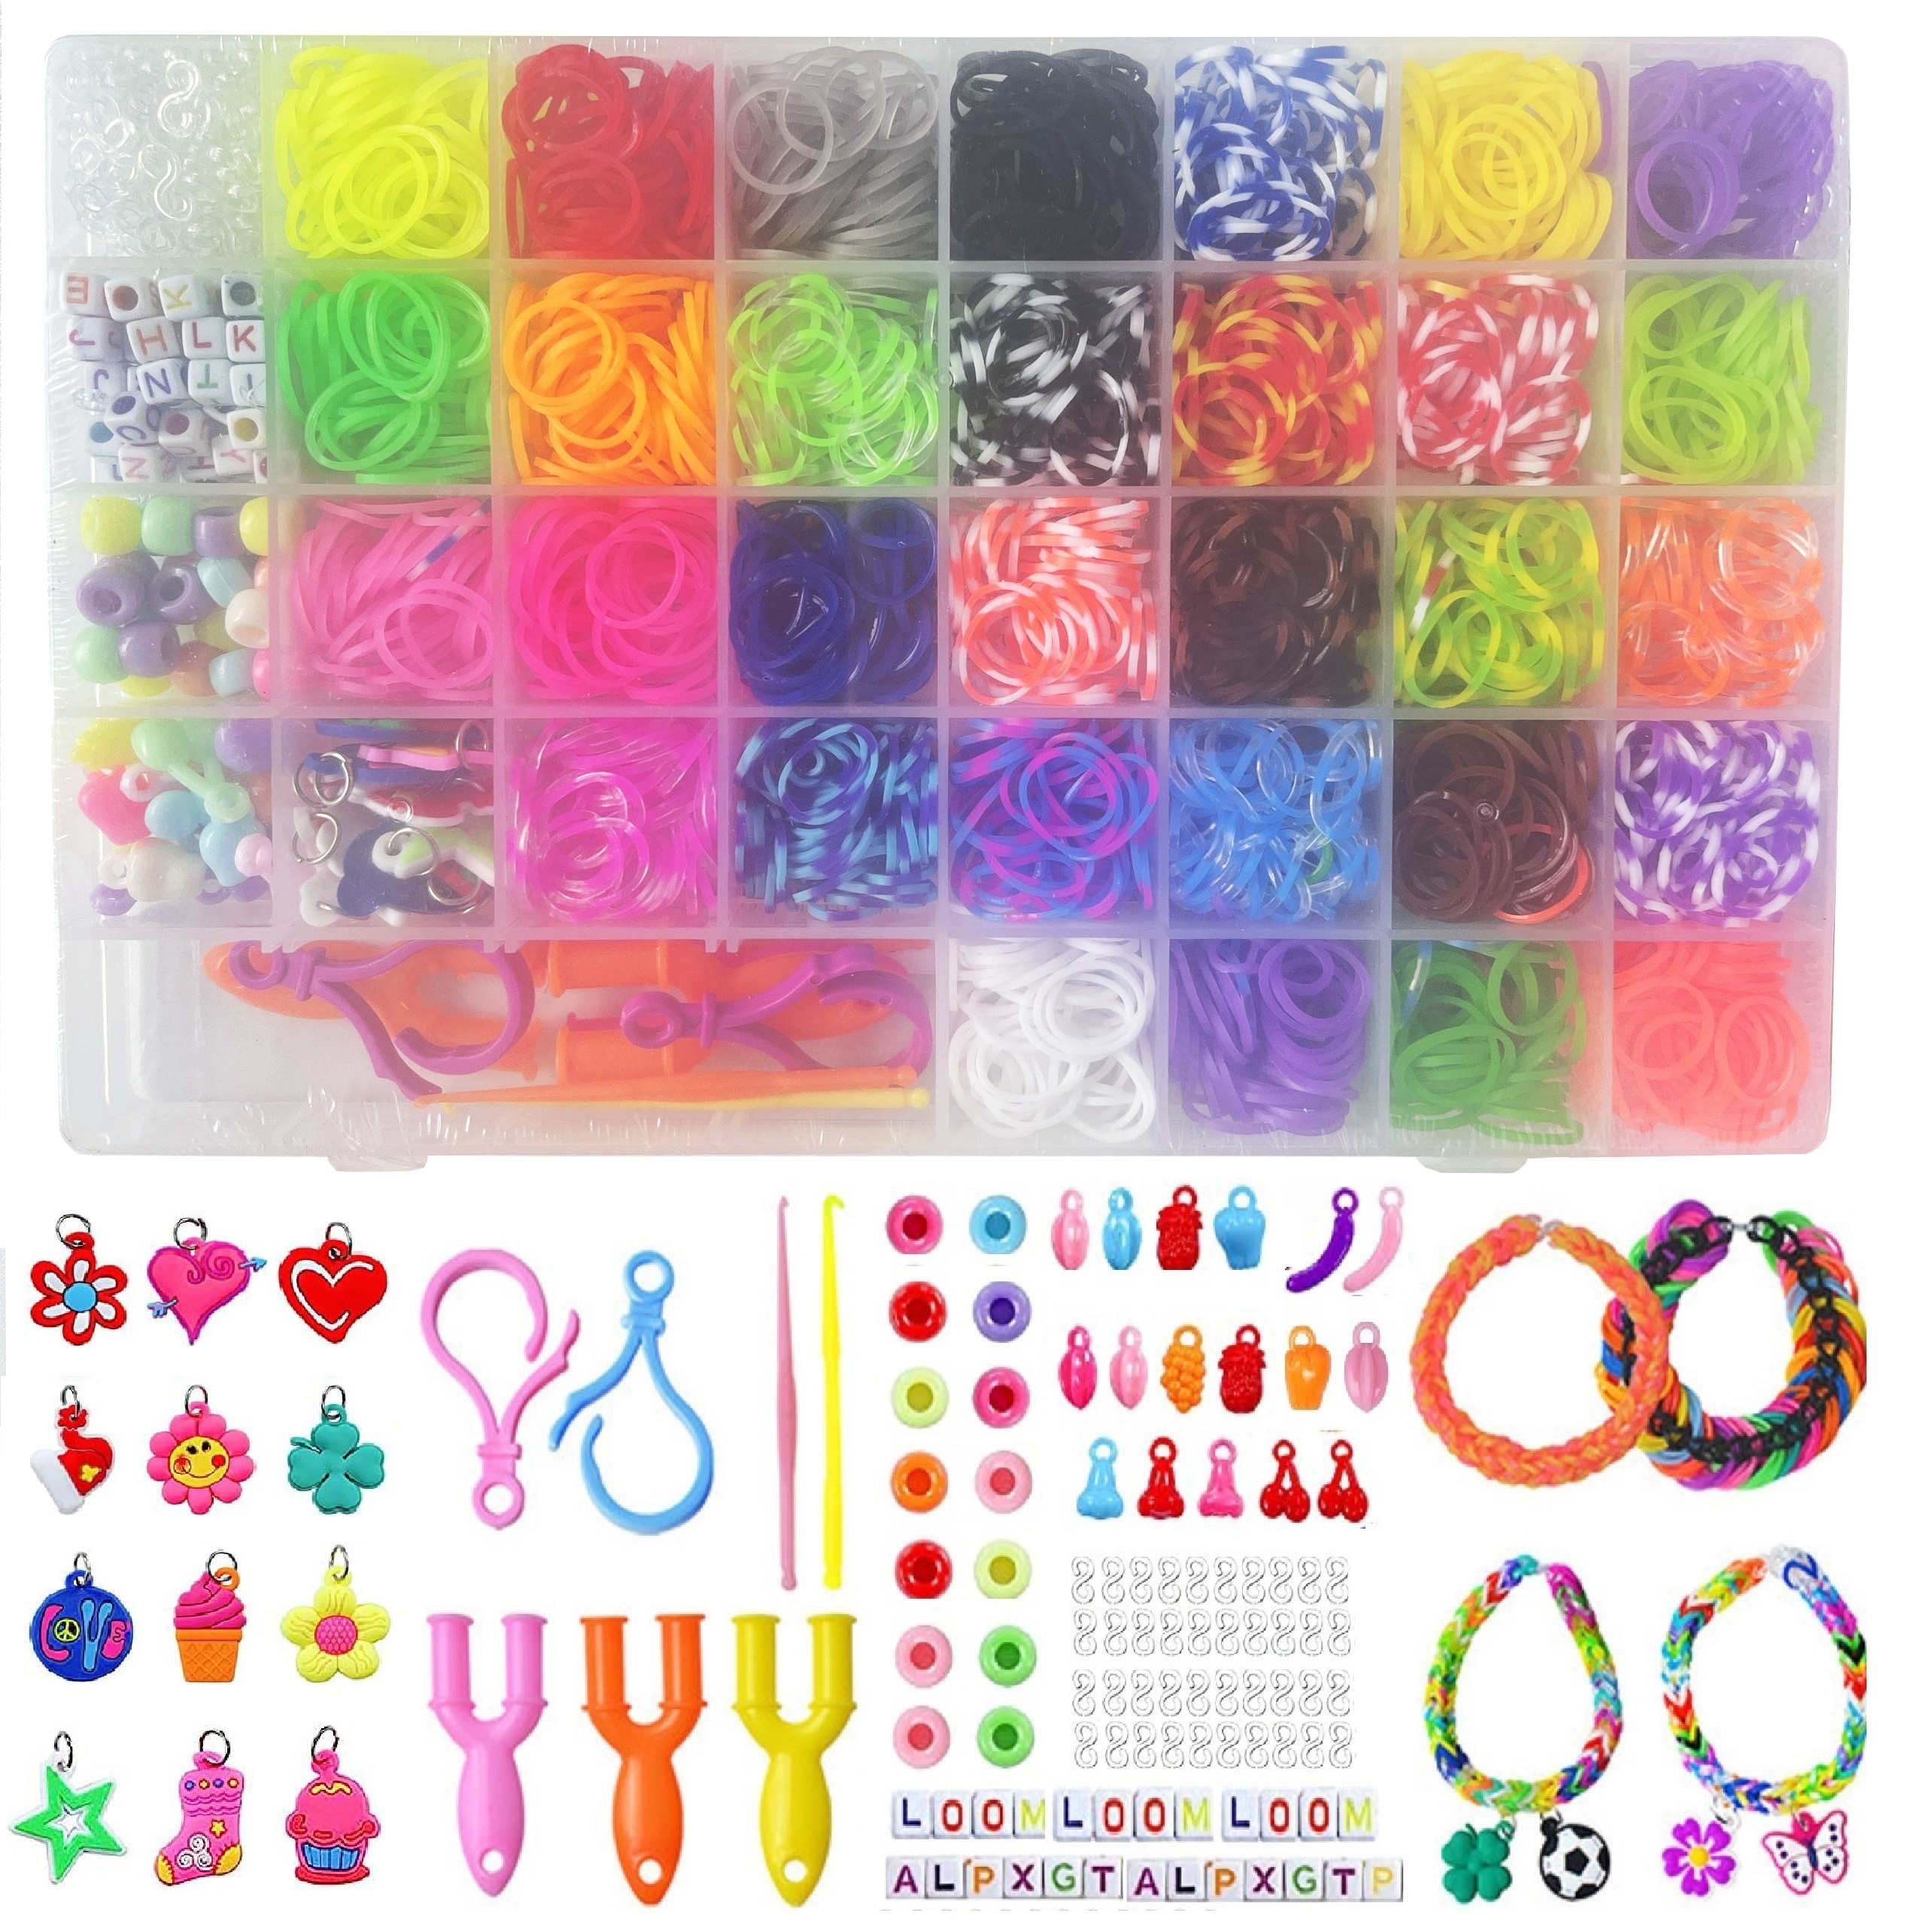 17500 Colorful Rubber Band Loom Refill Bag Set 34 Colors Leather Band Solid  Color Segment Color Filling Kit, 600 Clips, 6 Hooks, 1 Instruction, Premiu